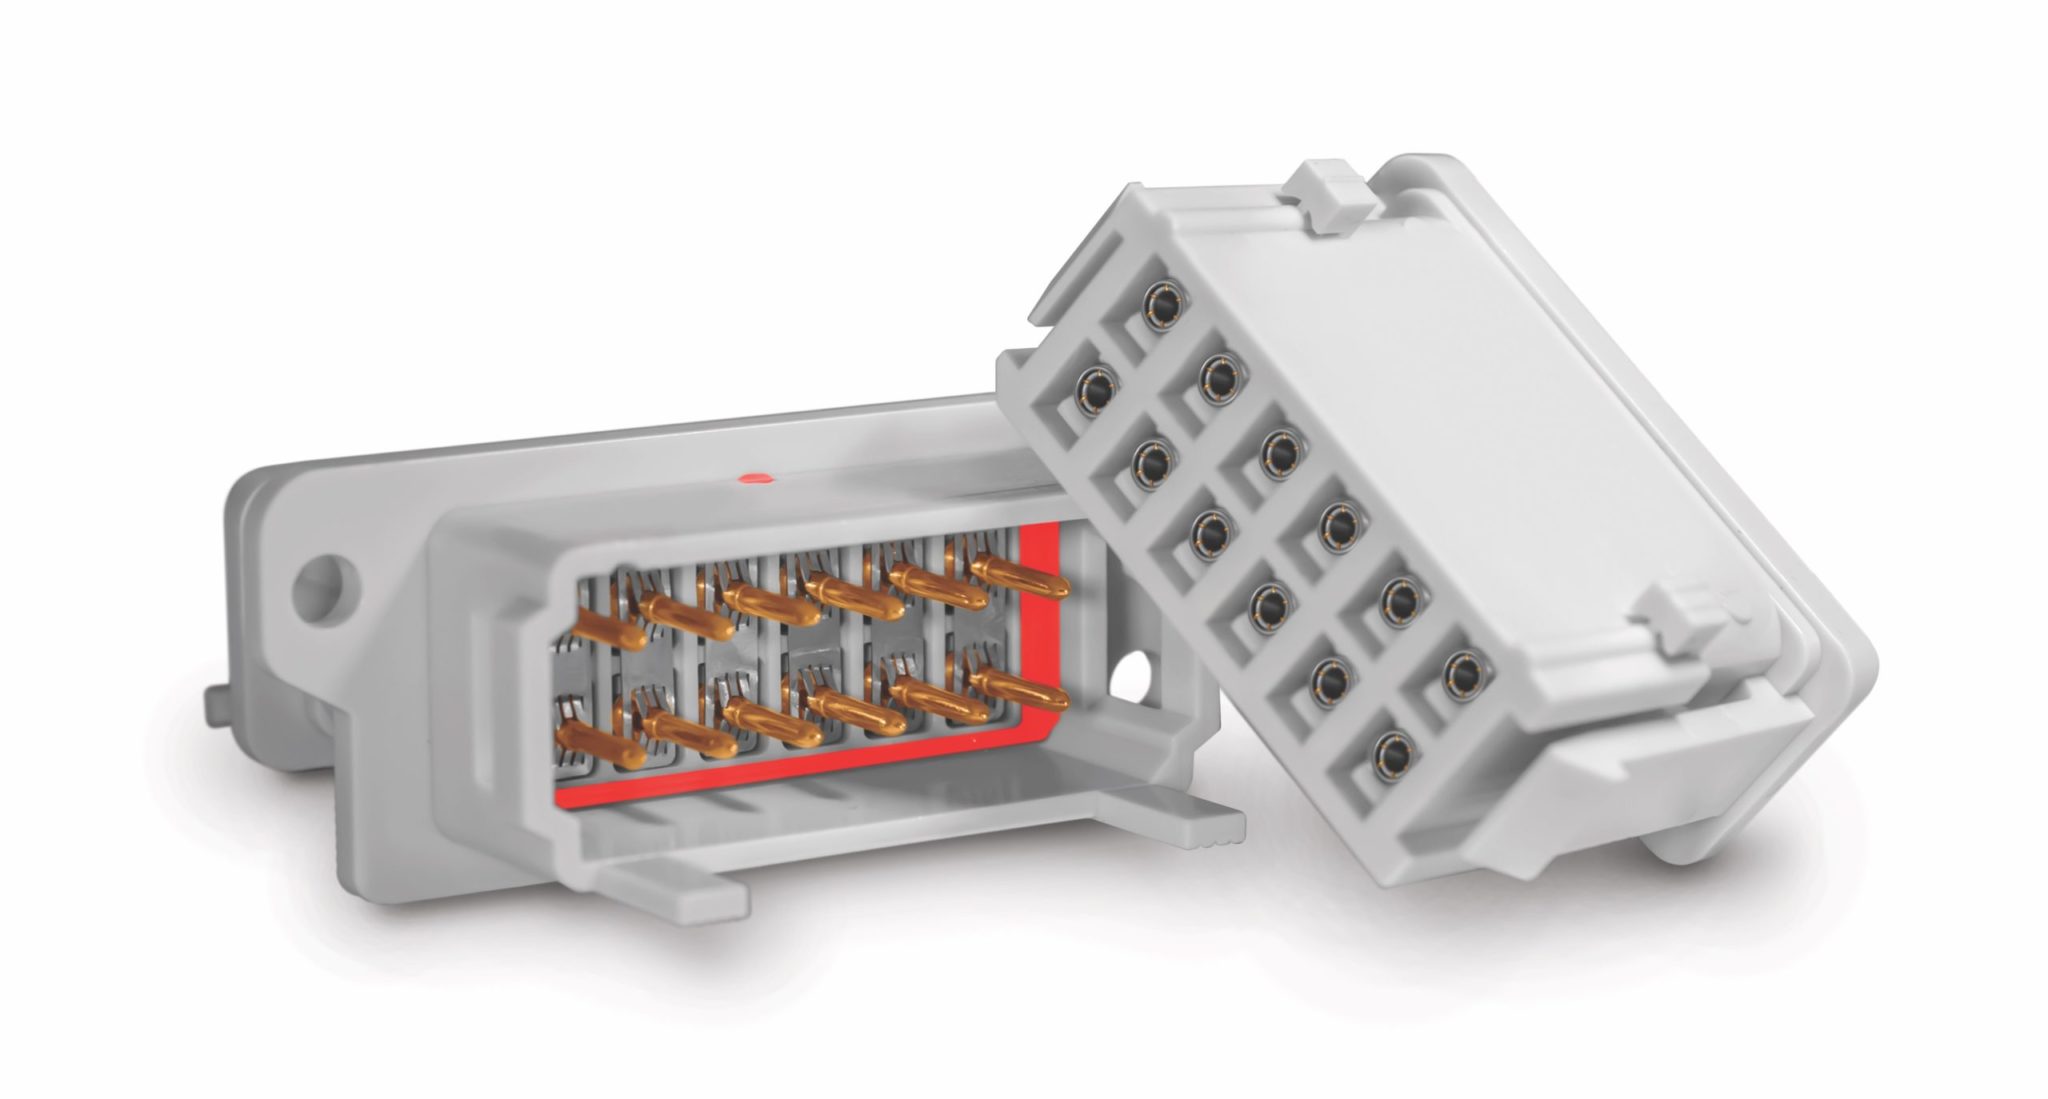 Smiths Interconnect REP Series quick-mating multipole rectangular plastic connectors for rail.